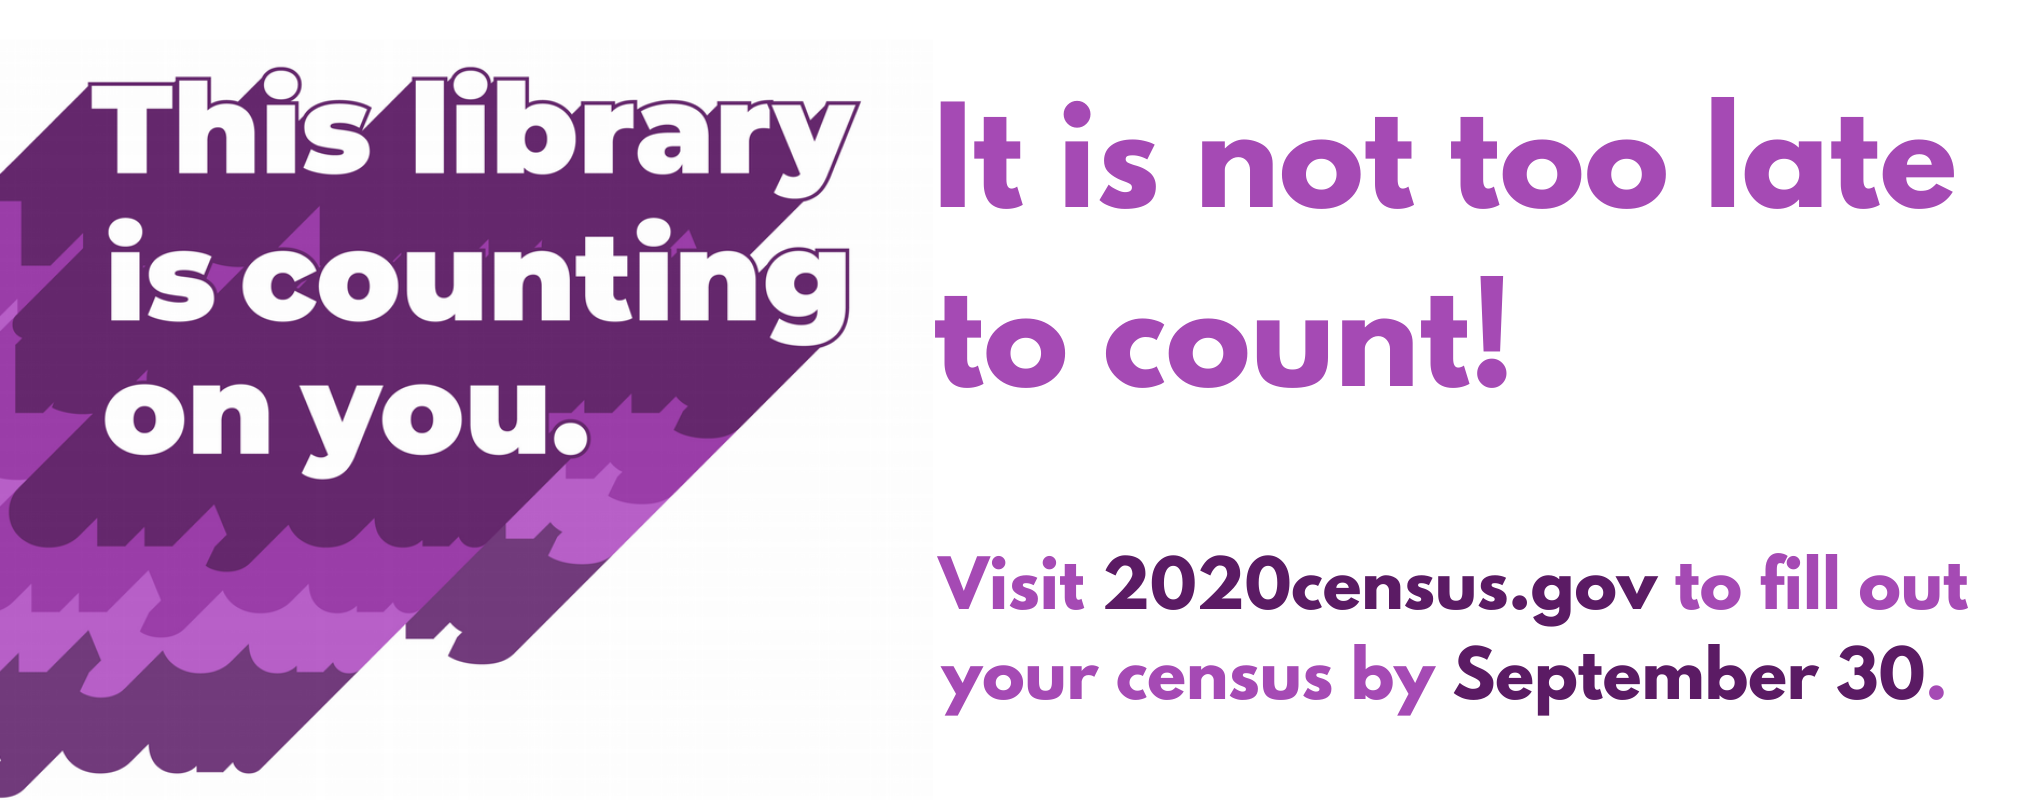 Libraries are counting on you to complete the 2020 Census!